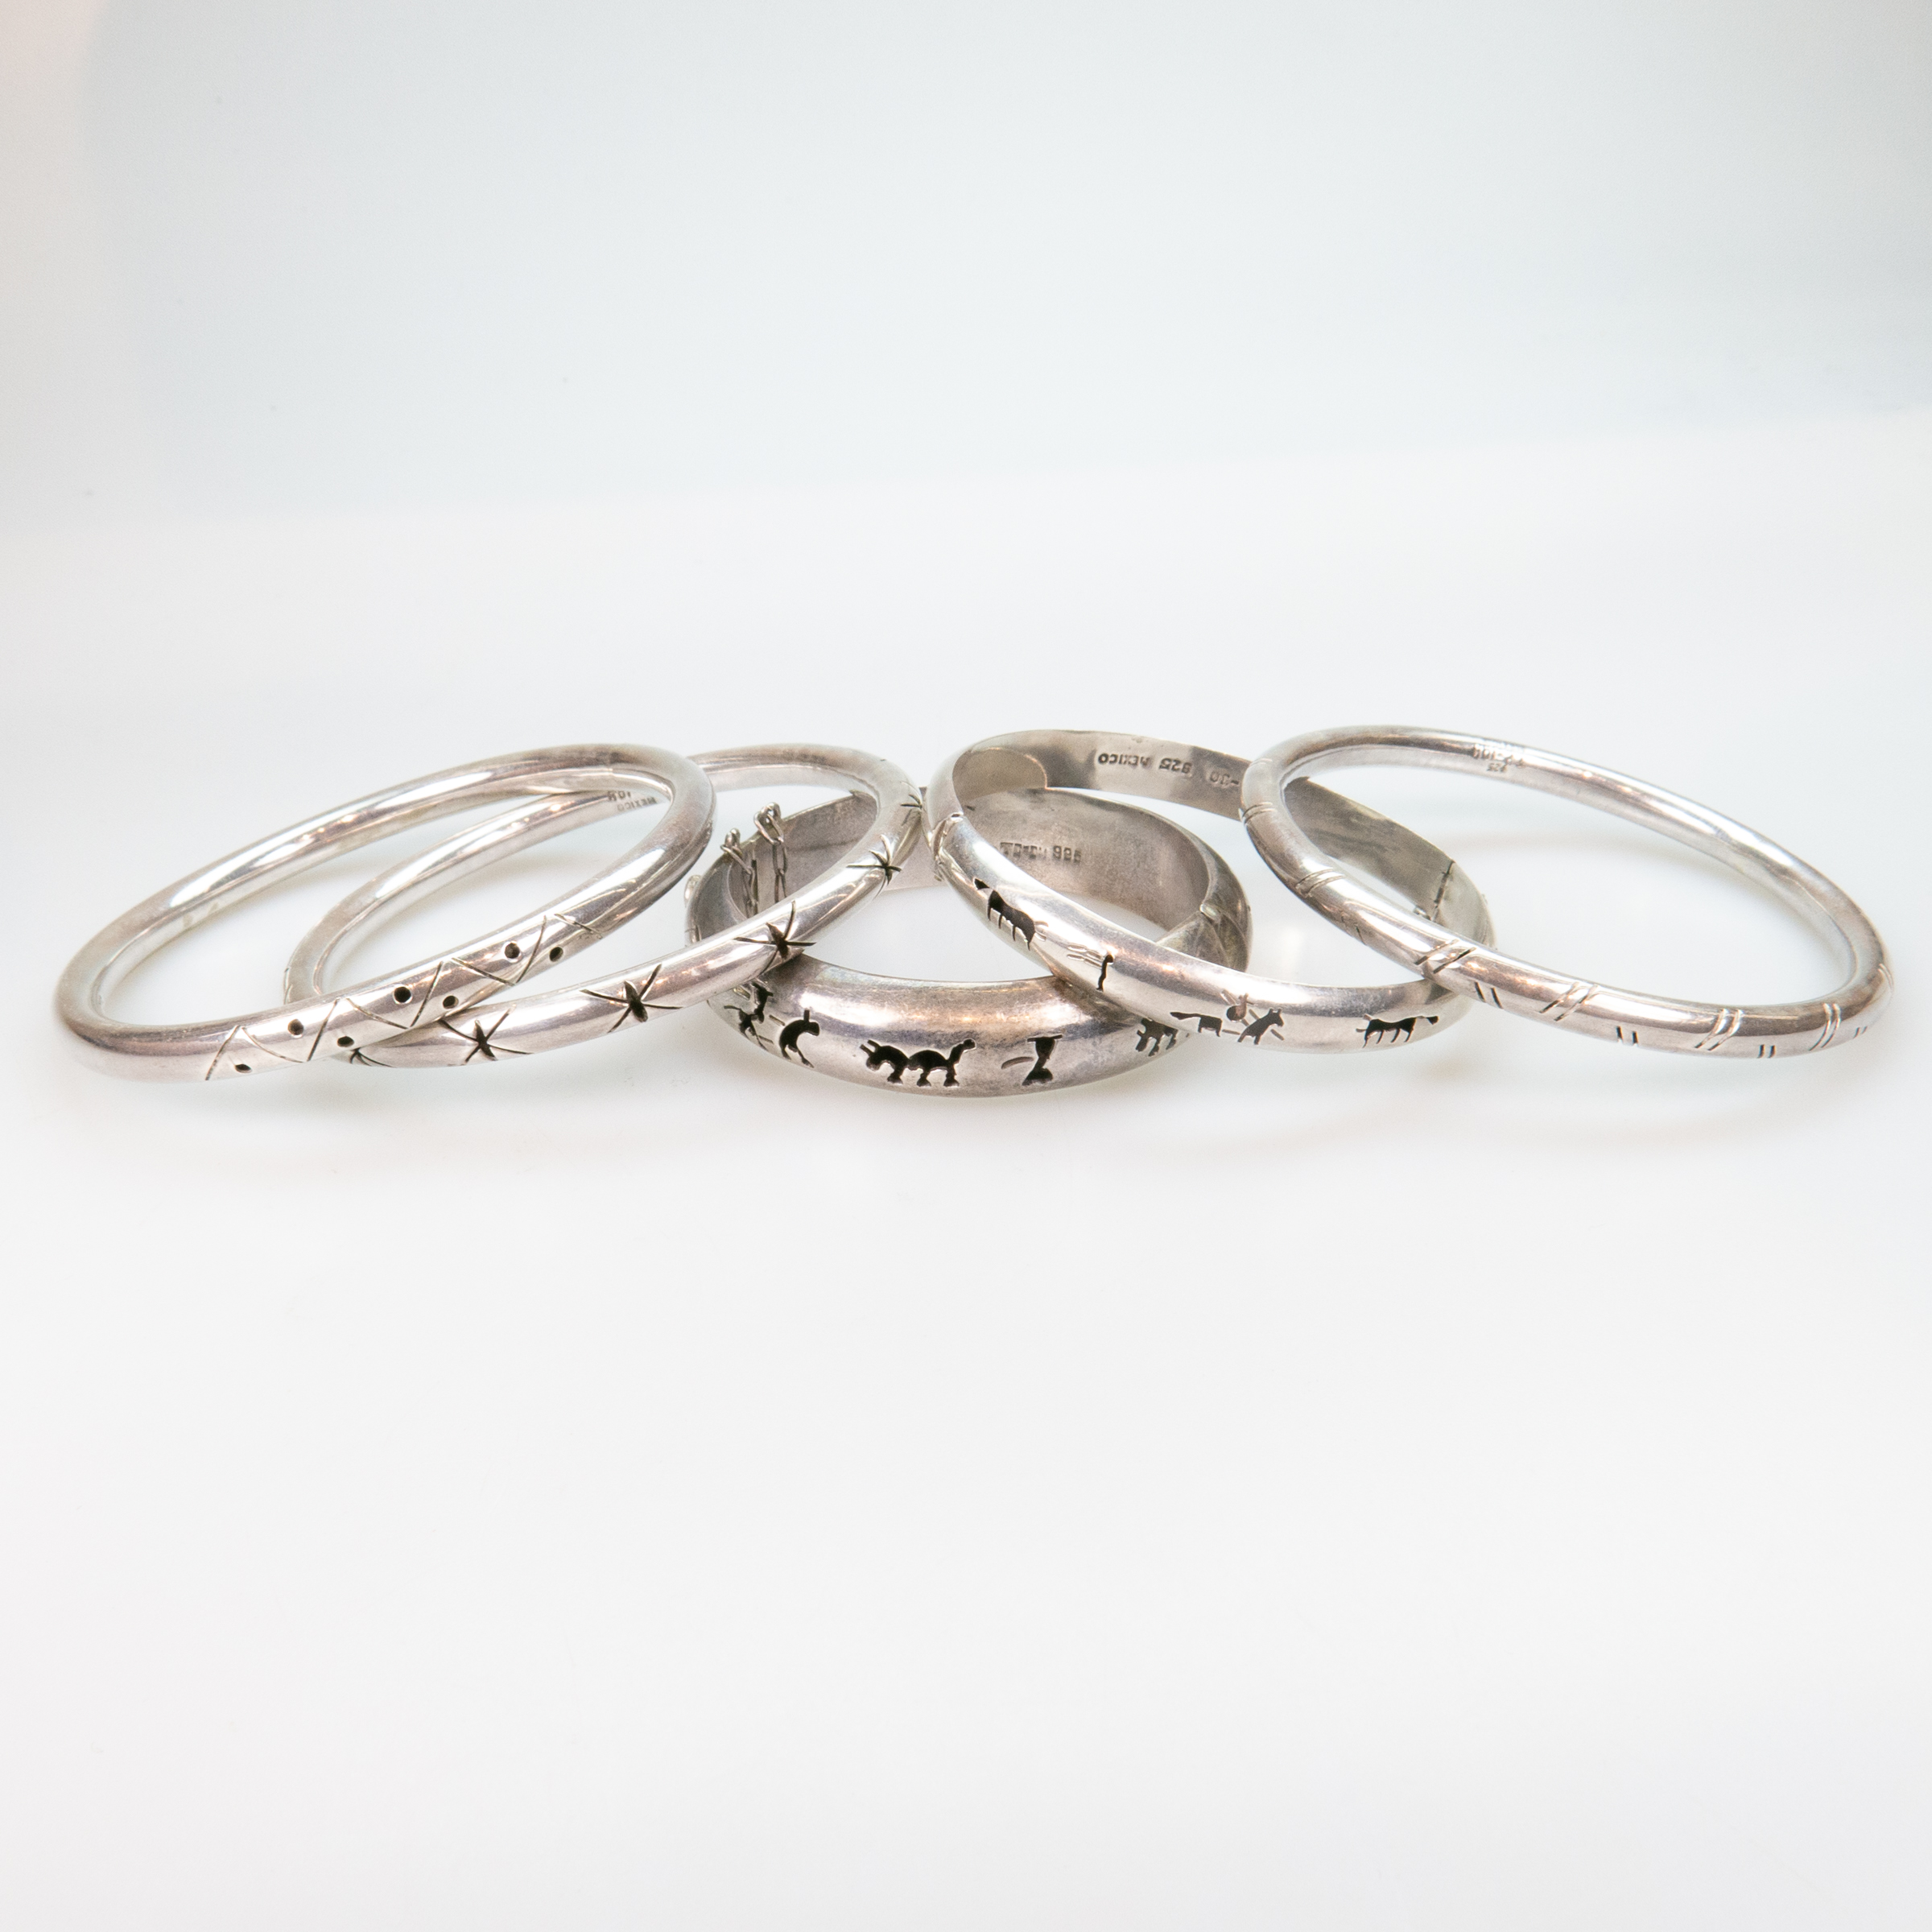 5 Mexican Sterling Silver Shadow Box Bangles